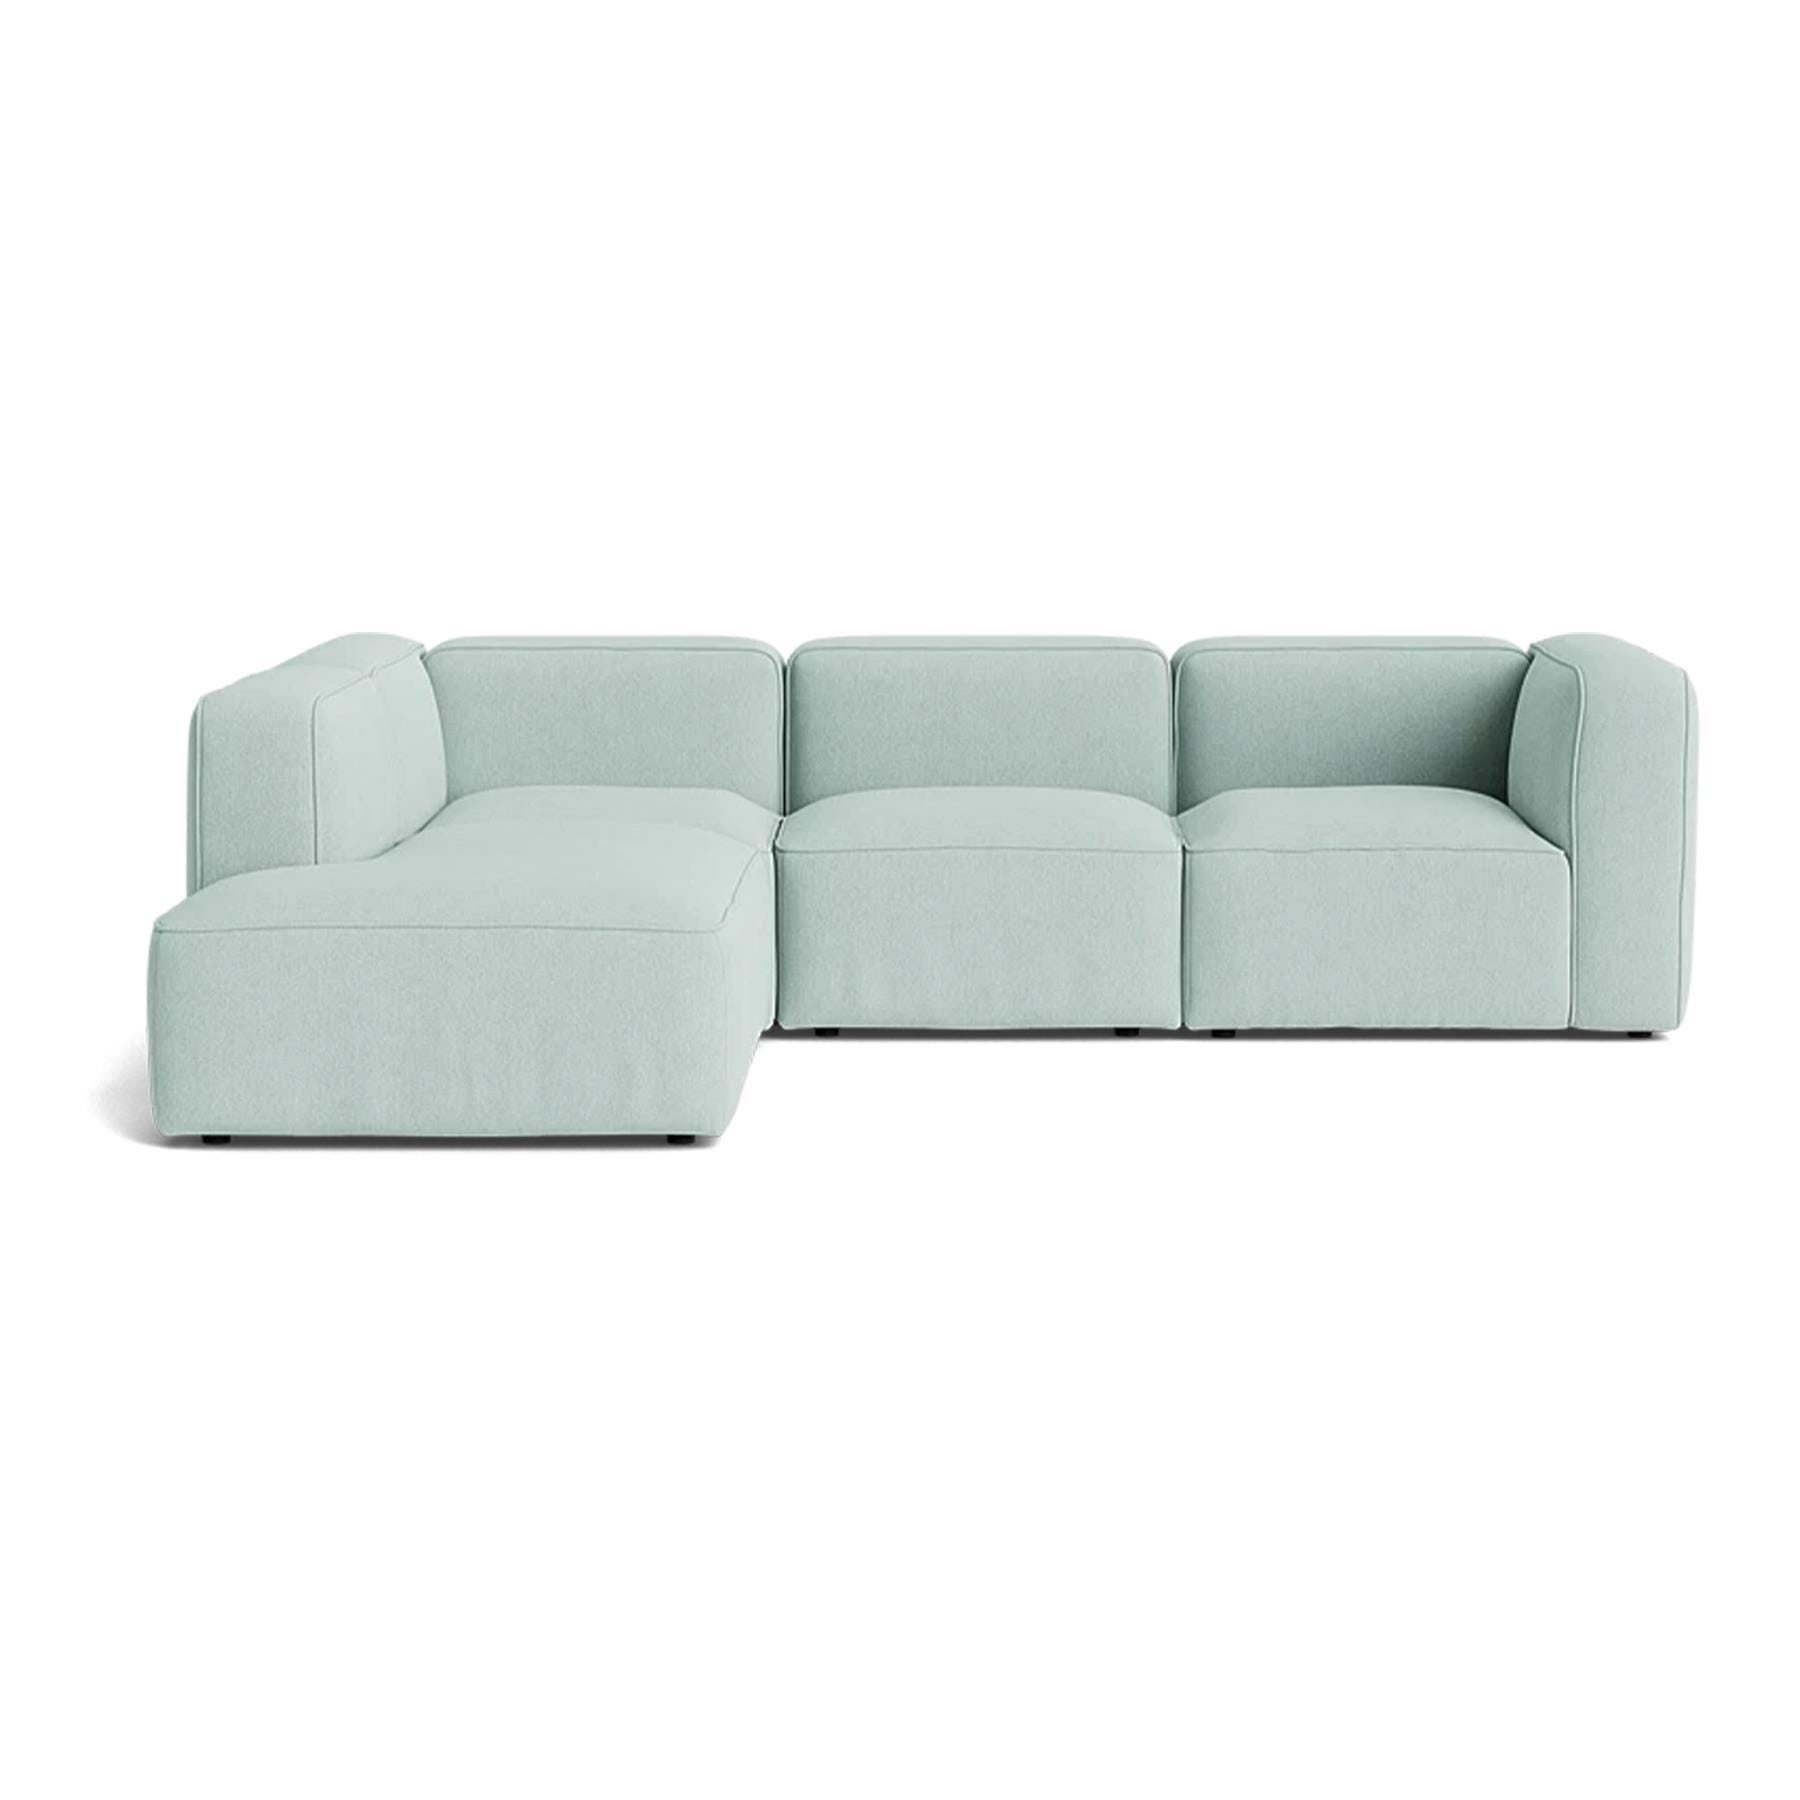 Make Nordic Basecamp Small Family Sofa Fiord 721 Left Blue Designer Furniture From Holloways Of Ludlow